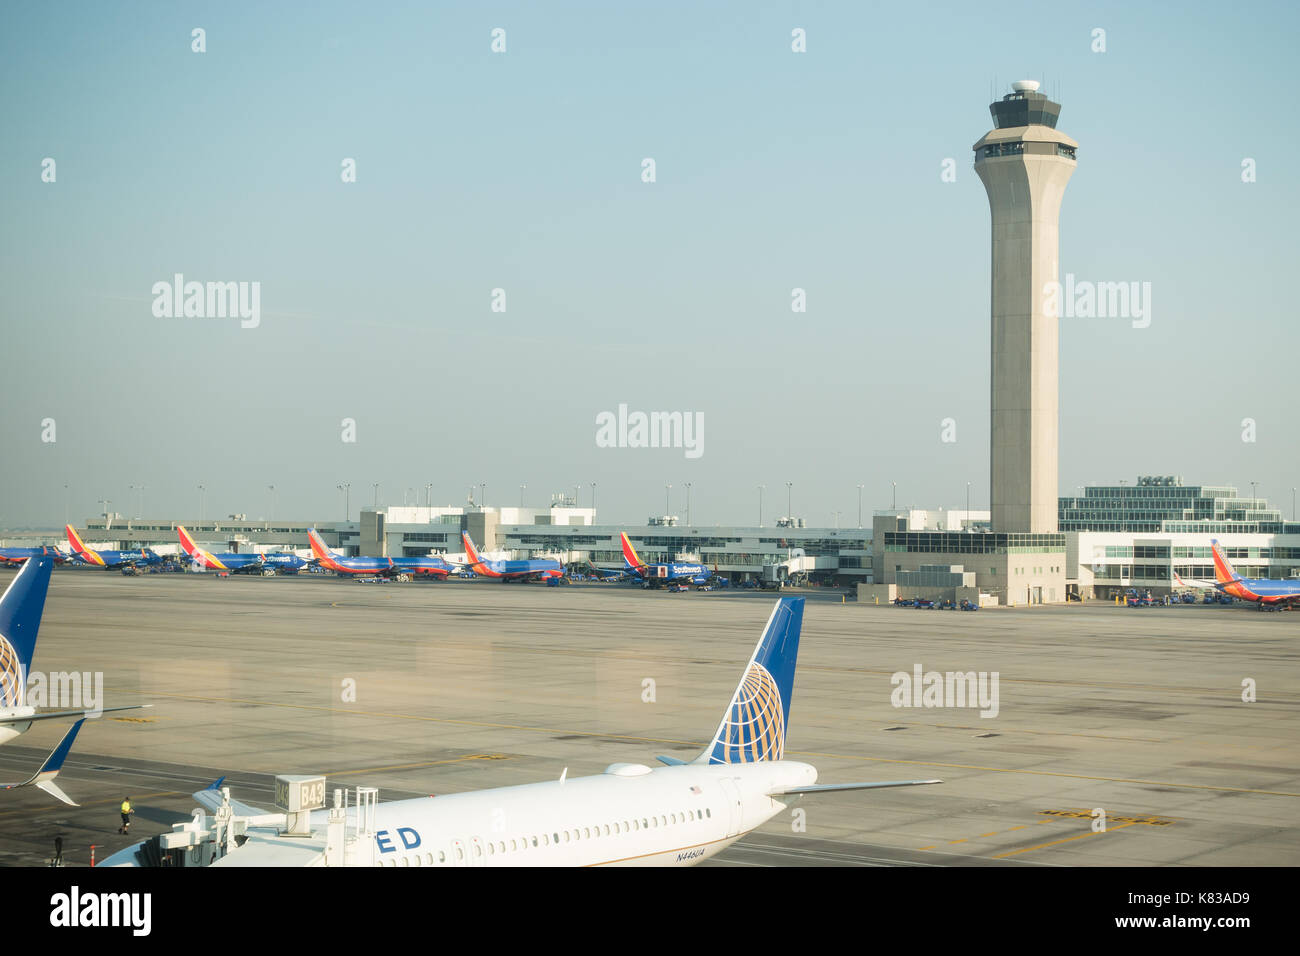 Look on the United Airlines terminal / hub at the Denver International Airport, Colorado Stock Photo